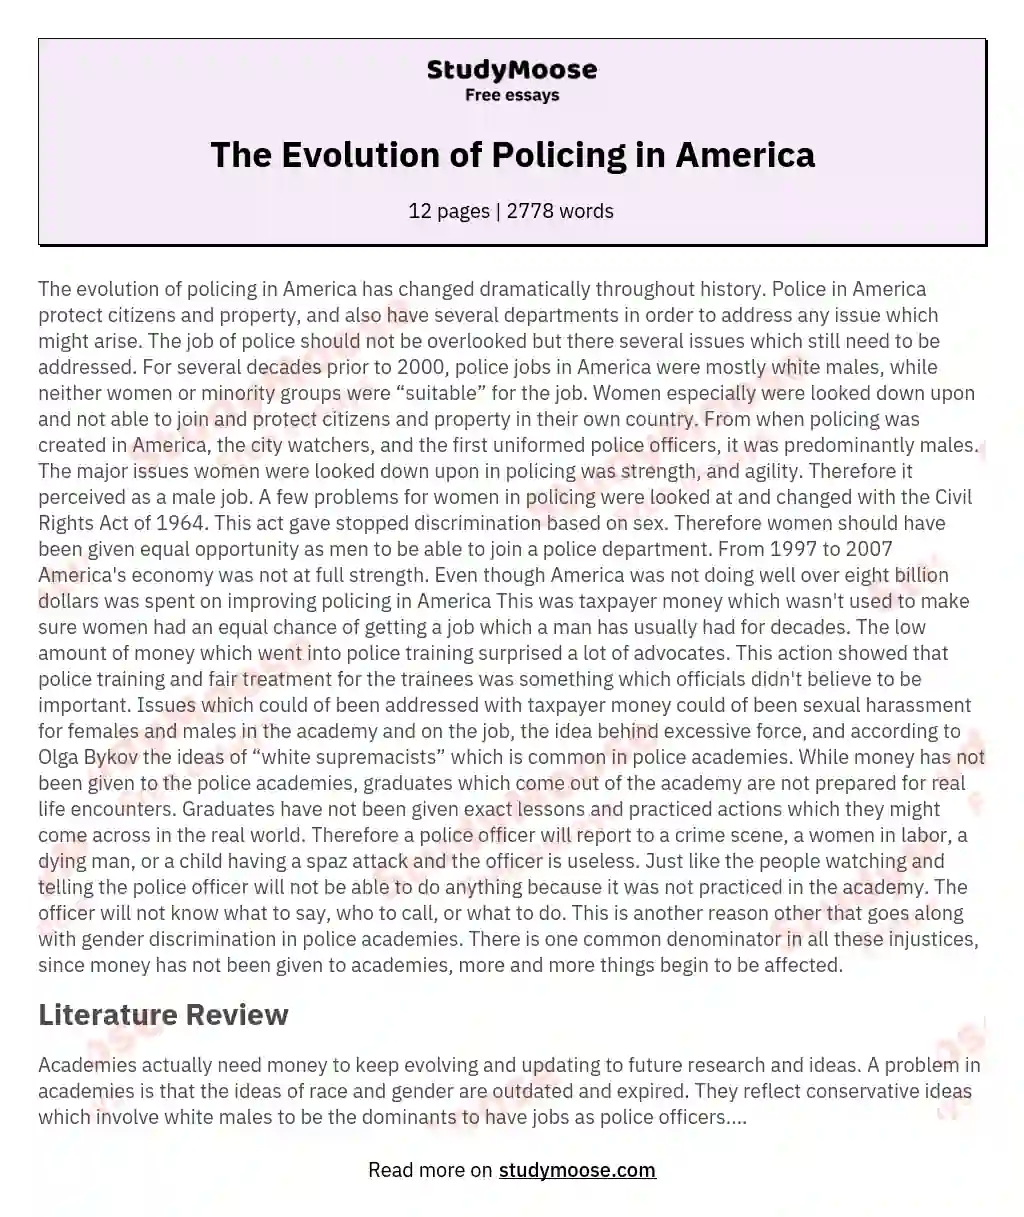 The Evolution of Policing in America essay